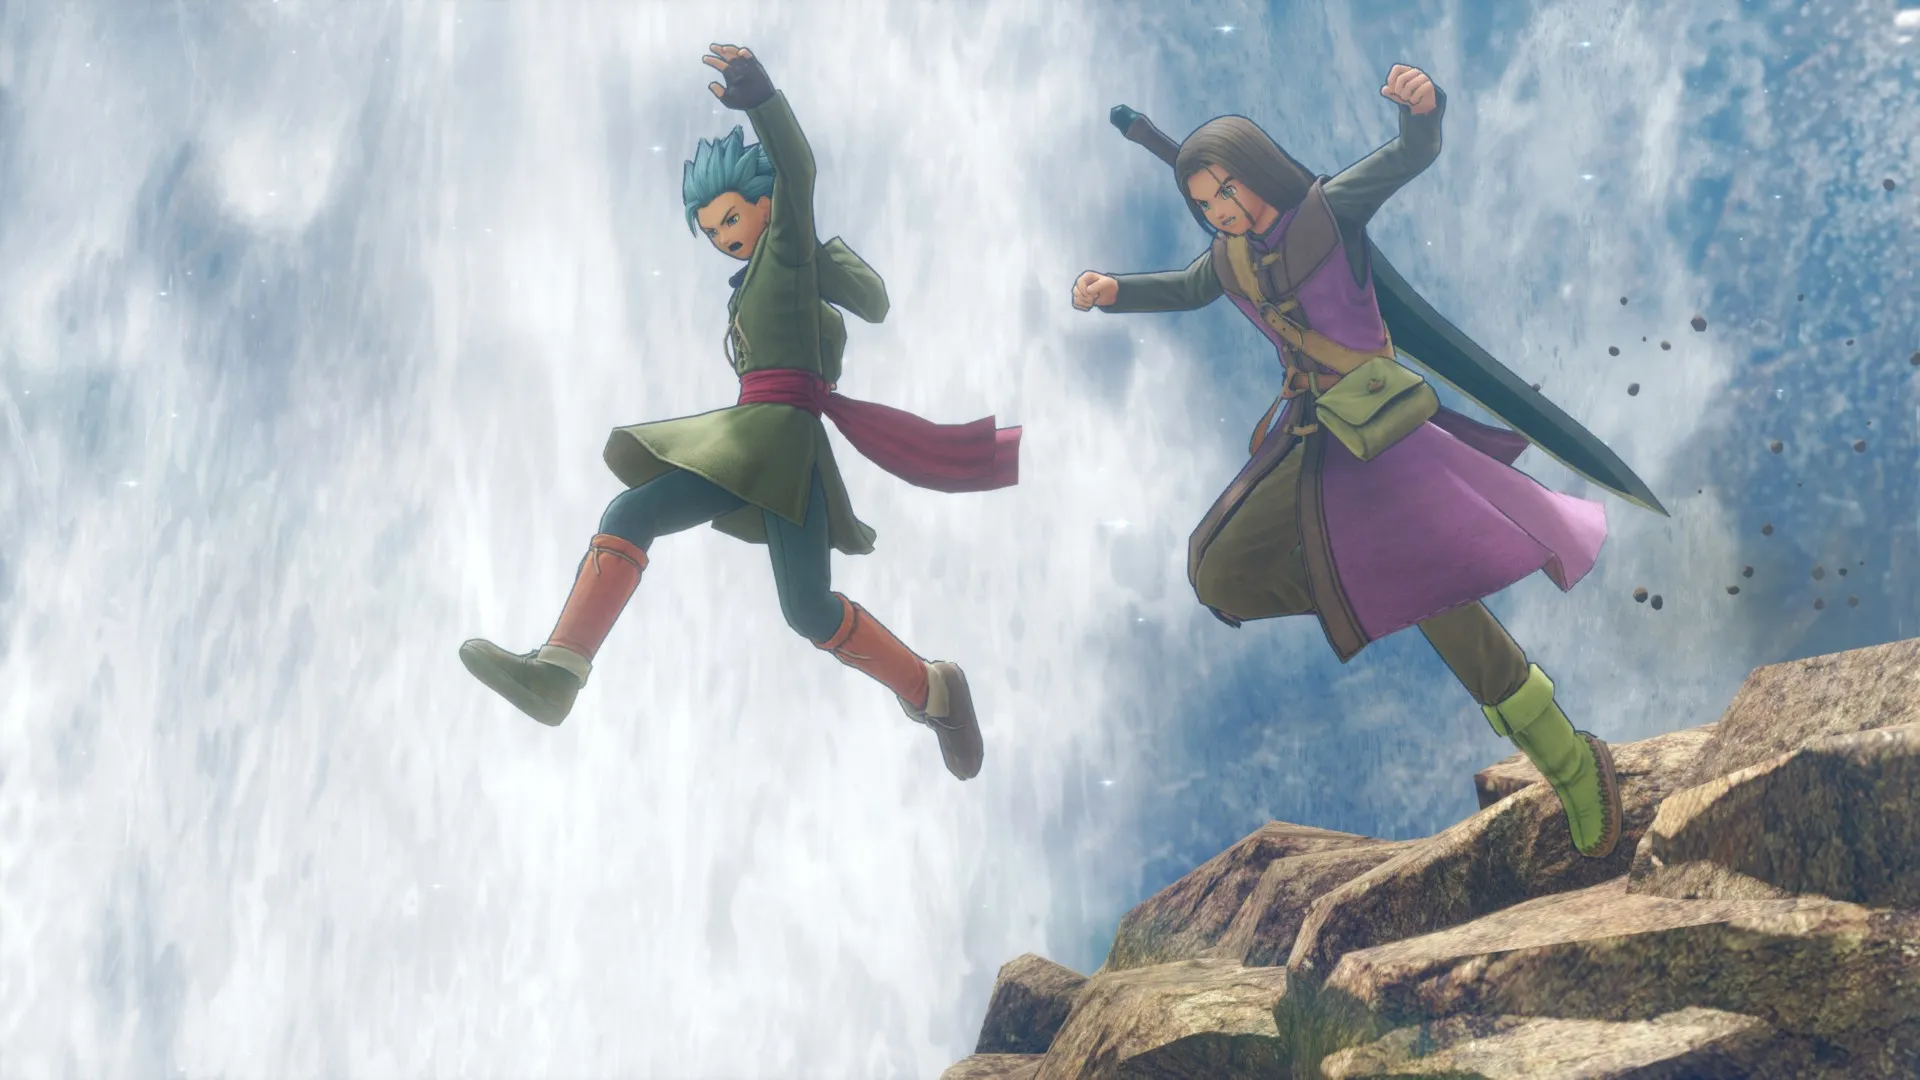 How Dragon Quest XI S: Echoes of an Elusive Age take us to a